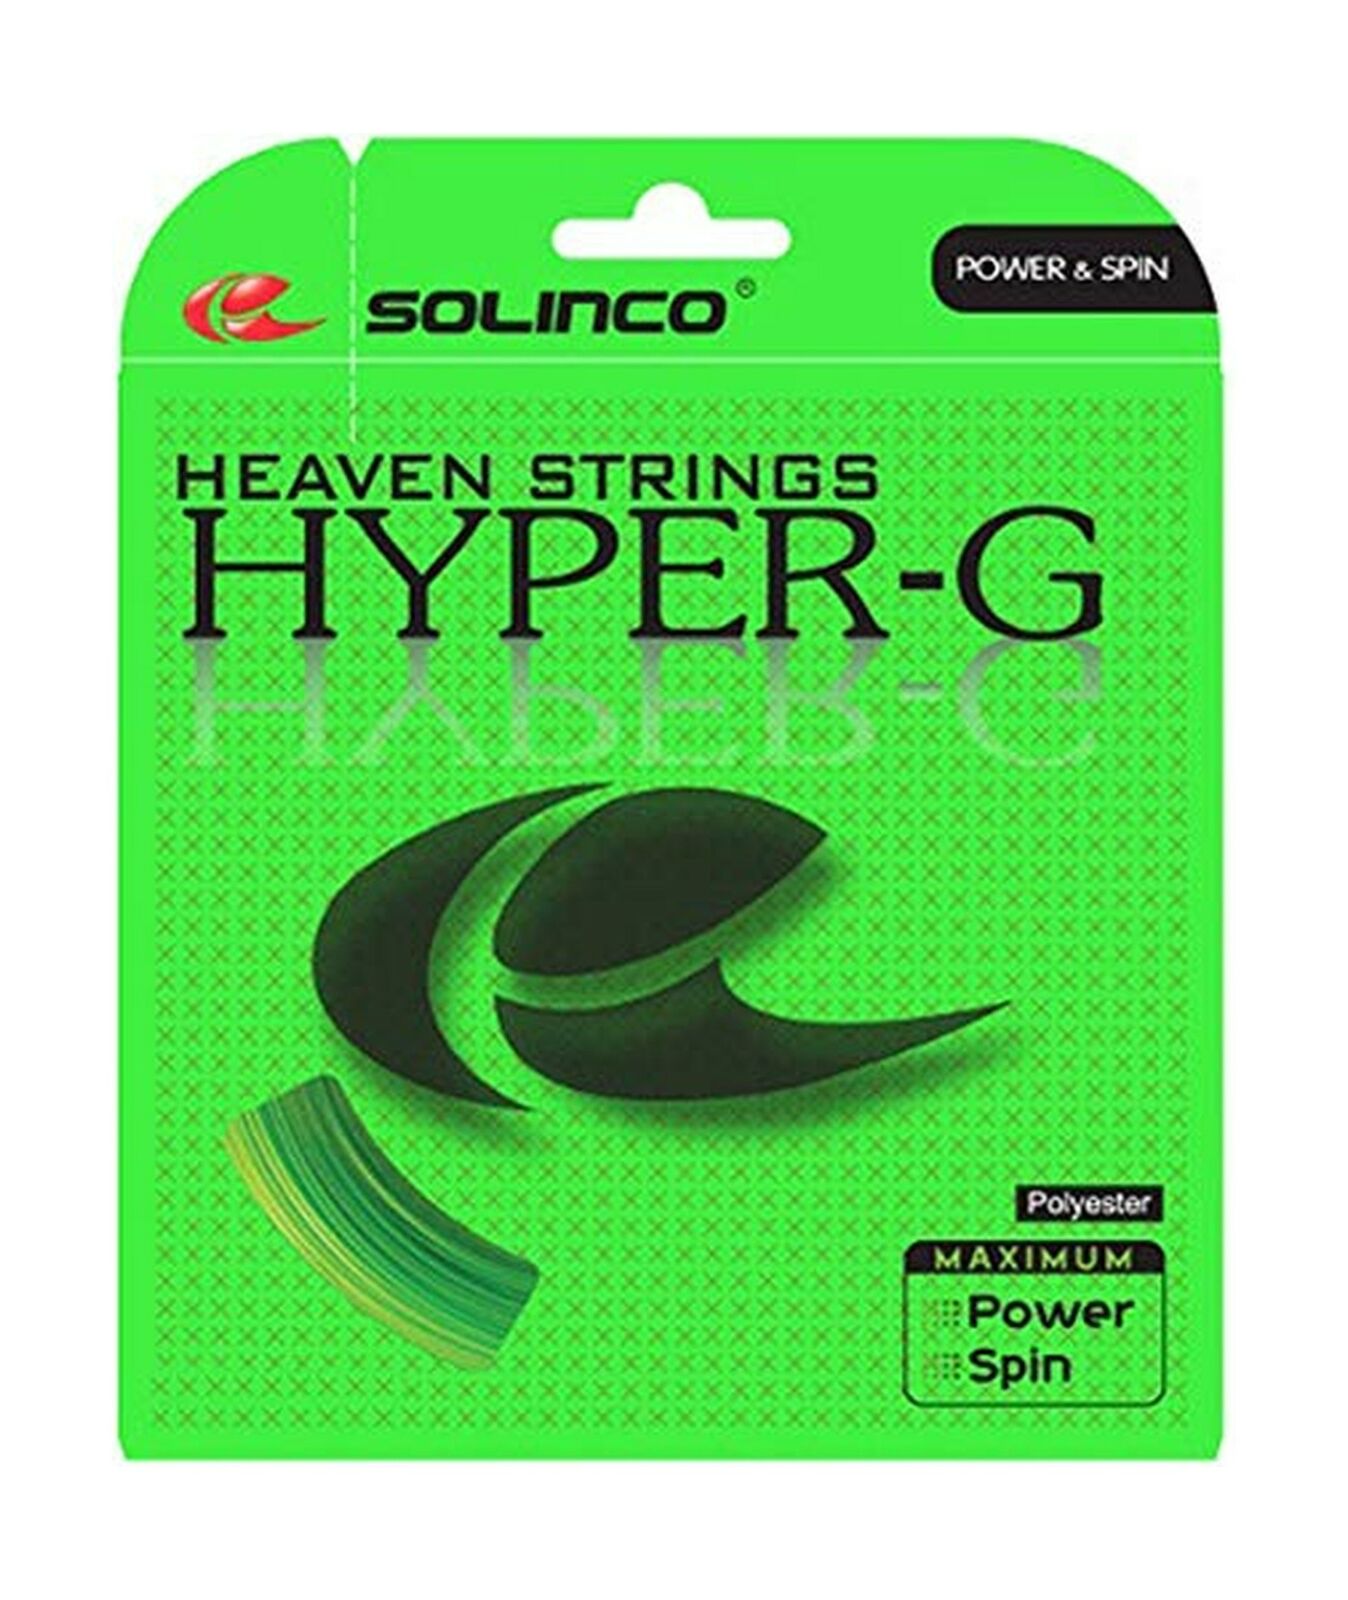 Solinco Hyper-g Heaven High Spin Poly String - 40 Foot Pack 18g